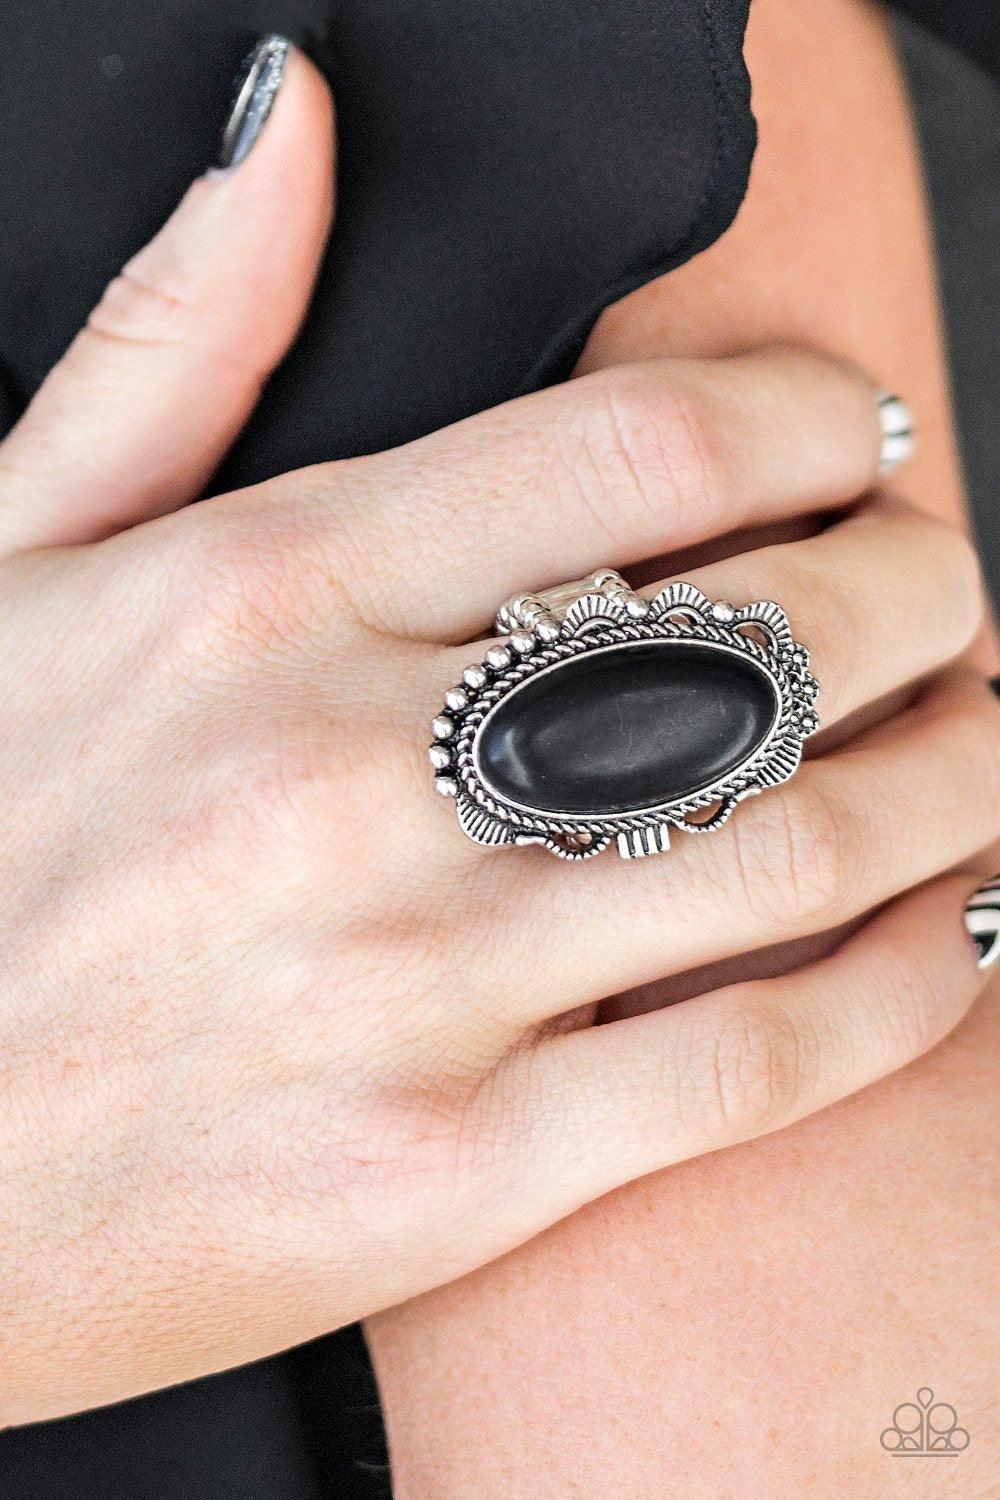 Paparazzi Accessories Open Range - Black An earthy black stone is pressed into an ornate silver frame rippling with studded and serrated textures for a seasonal flair. Features a stretchy band for a flexible fit. Sold as one individual ring. Jewelry